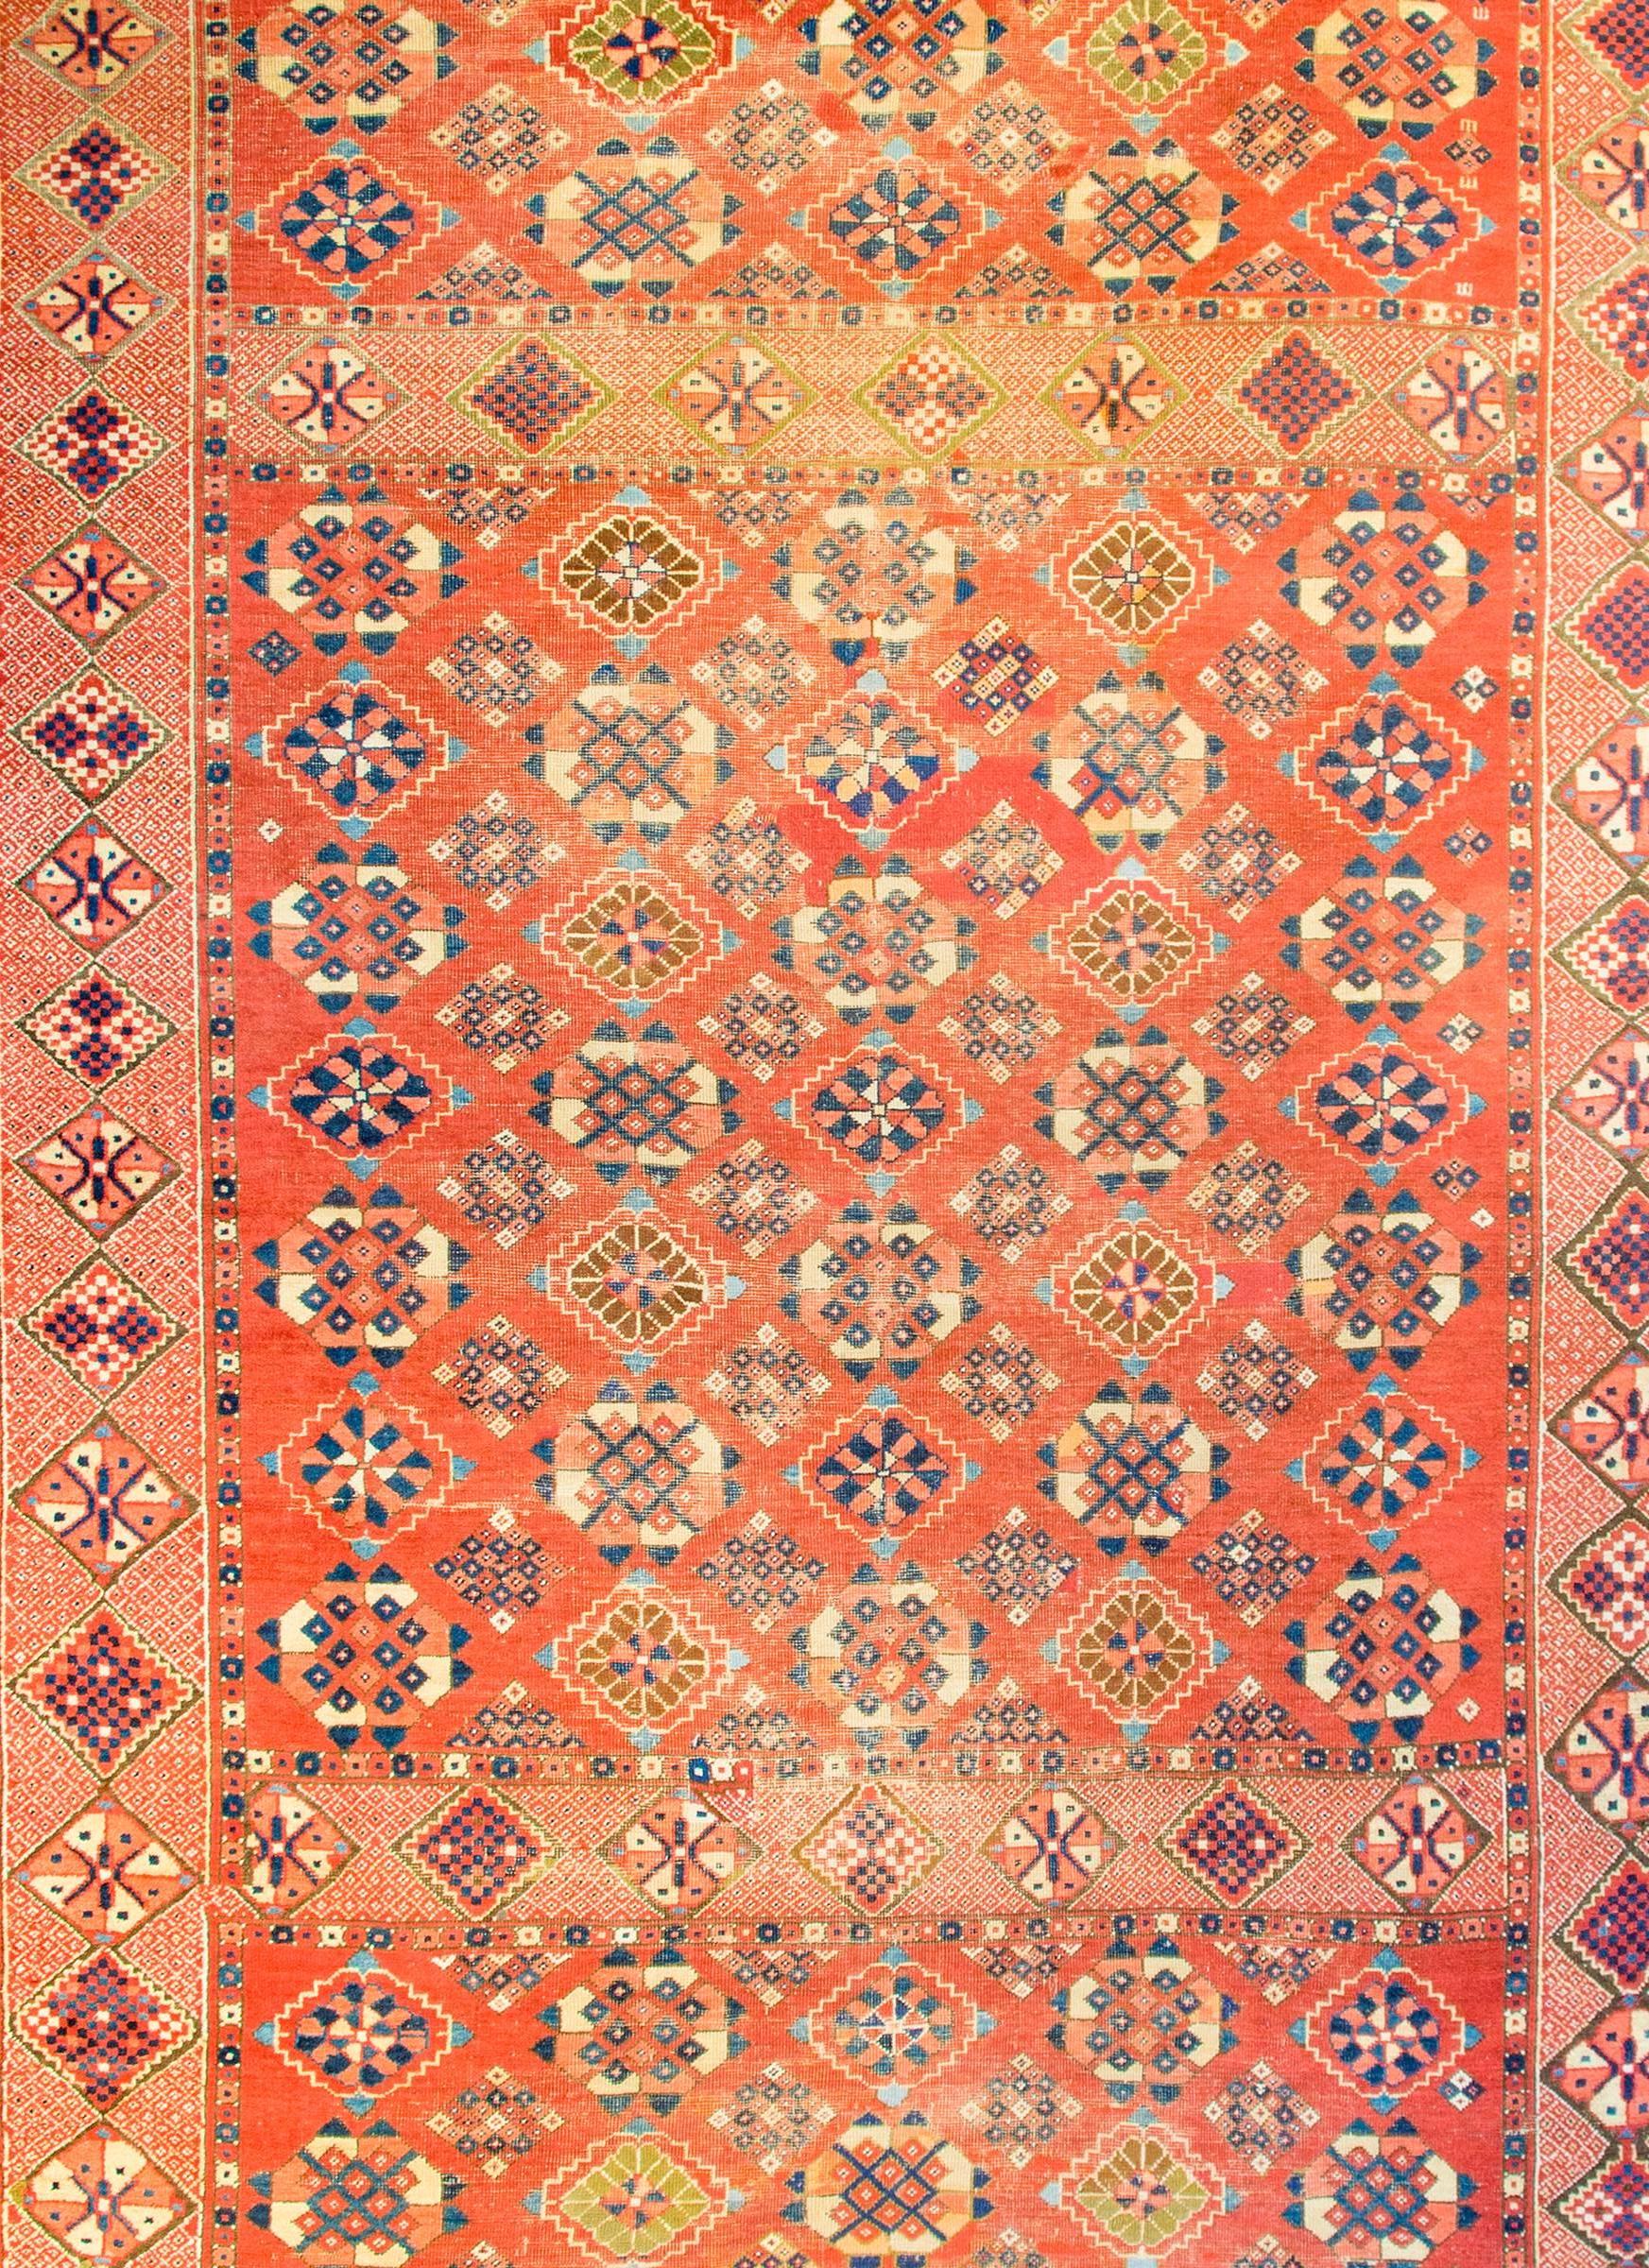 An incredible late 19th century Afghani Bashir rug with an unbelievable and intricately woven pattern containing all-over stylized flowers woven in indigo, gold, green, and salmon colored wool, on a bright crimson background. The border is wide with